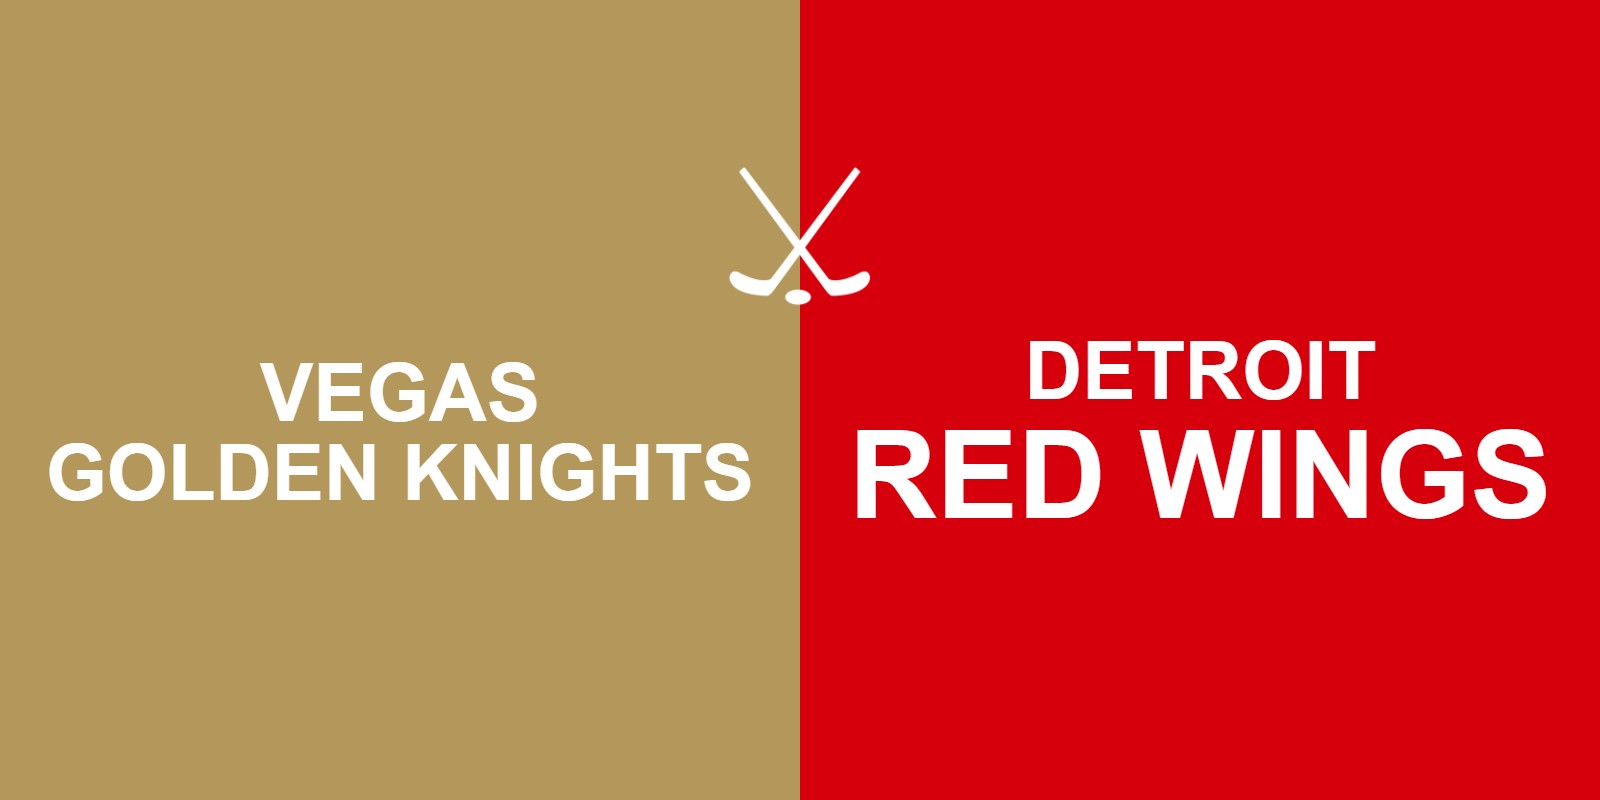 Golden Knights vs Red Wings